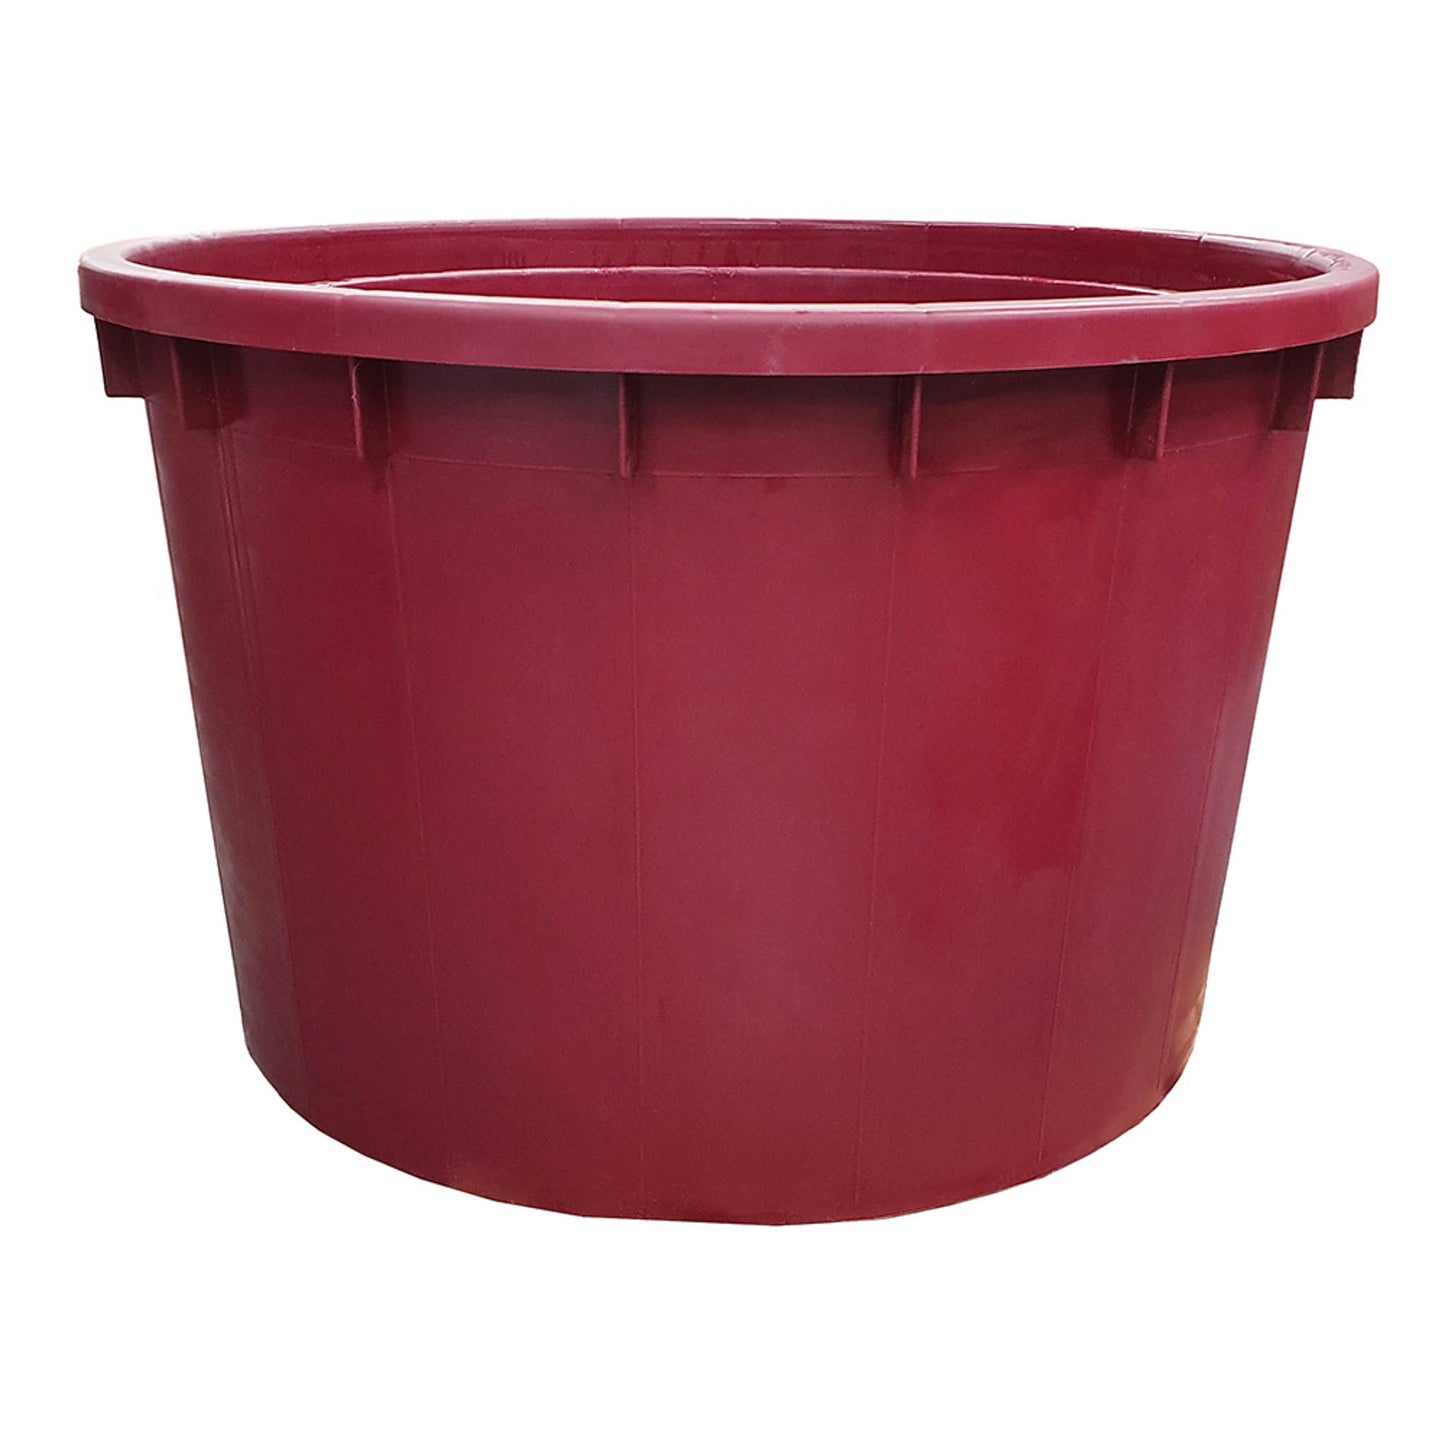 Italian Made 500 litre red food grade plastic wine vat for storing and fermenting wine